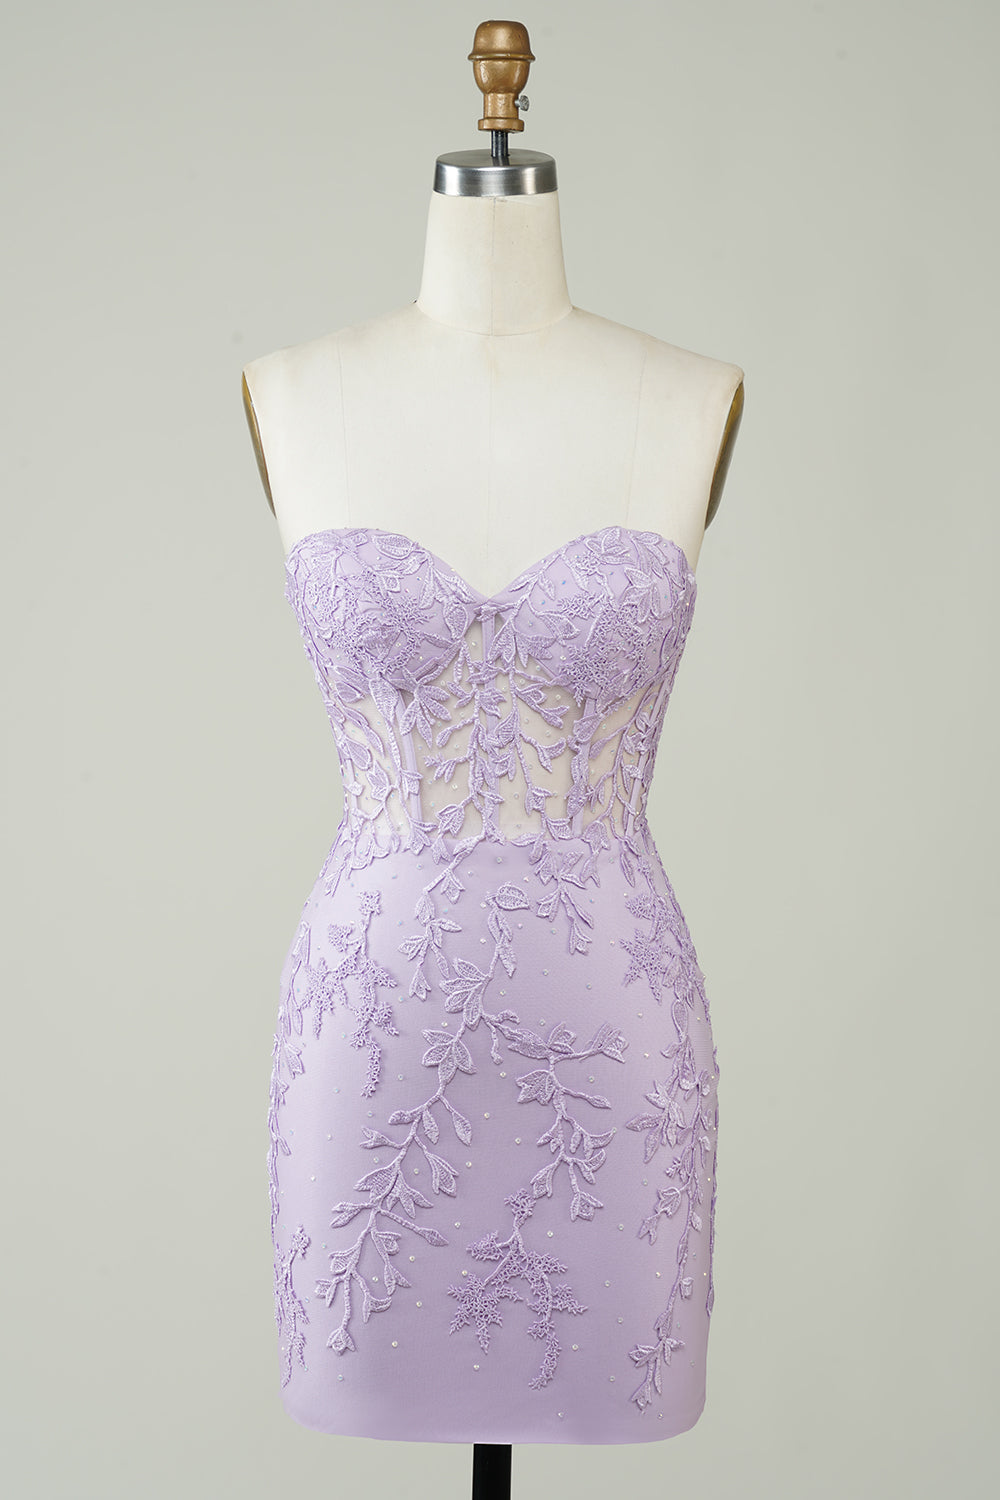 Bodycon Sweetheart Purple Corset Homecoming Dress with Appliques